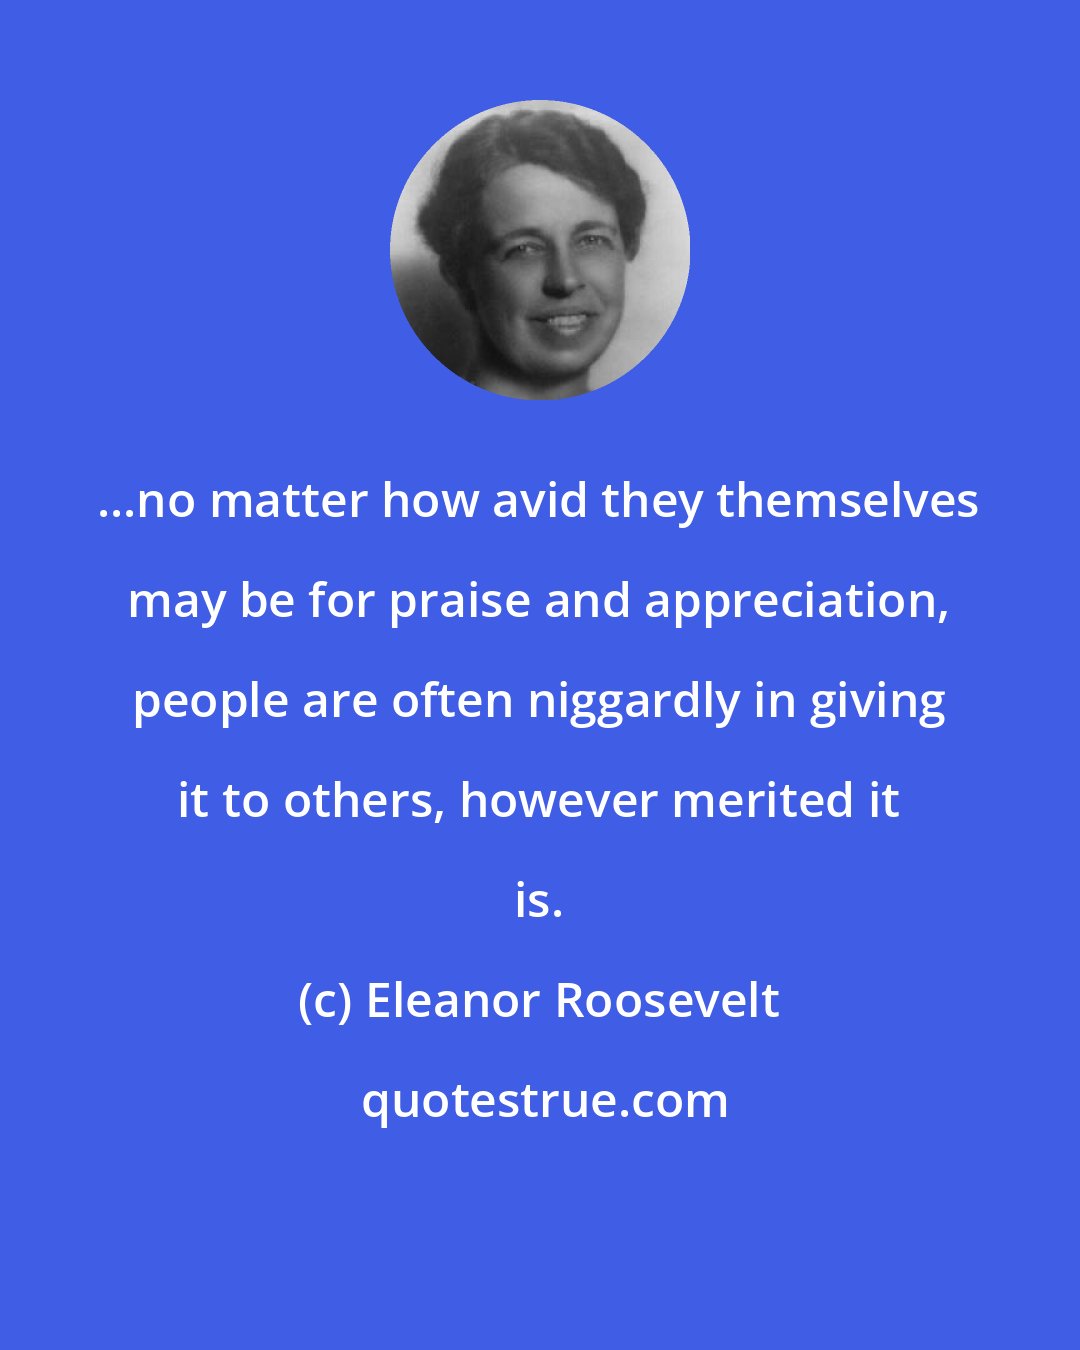 Eleanor Roosevelt: ...no matter how avid they themselves may be for praise and appreciation, people are often niggardly in giving it to others, however merited it is.